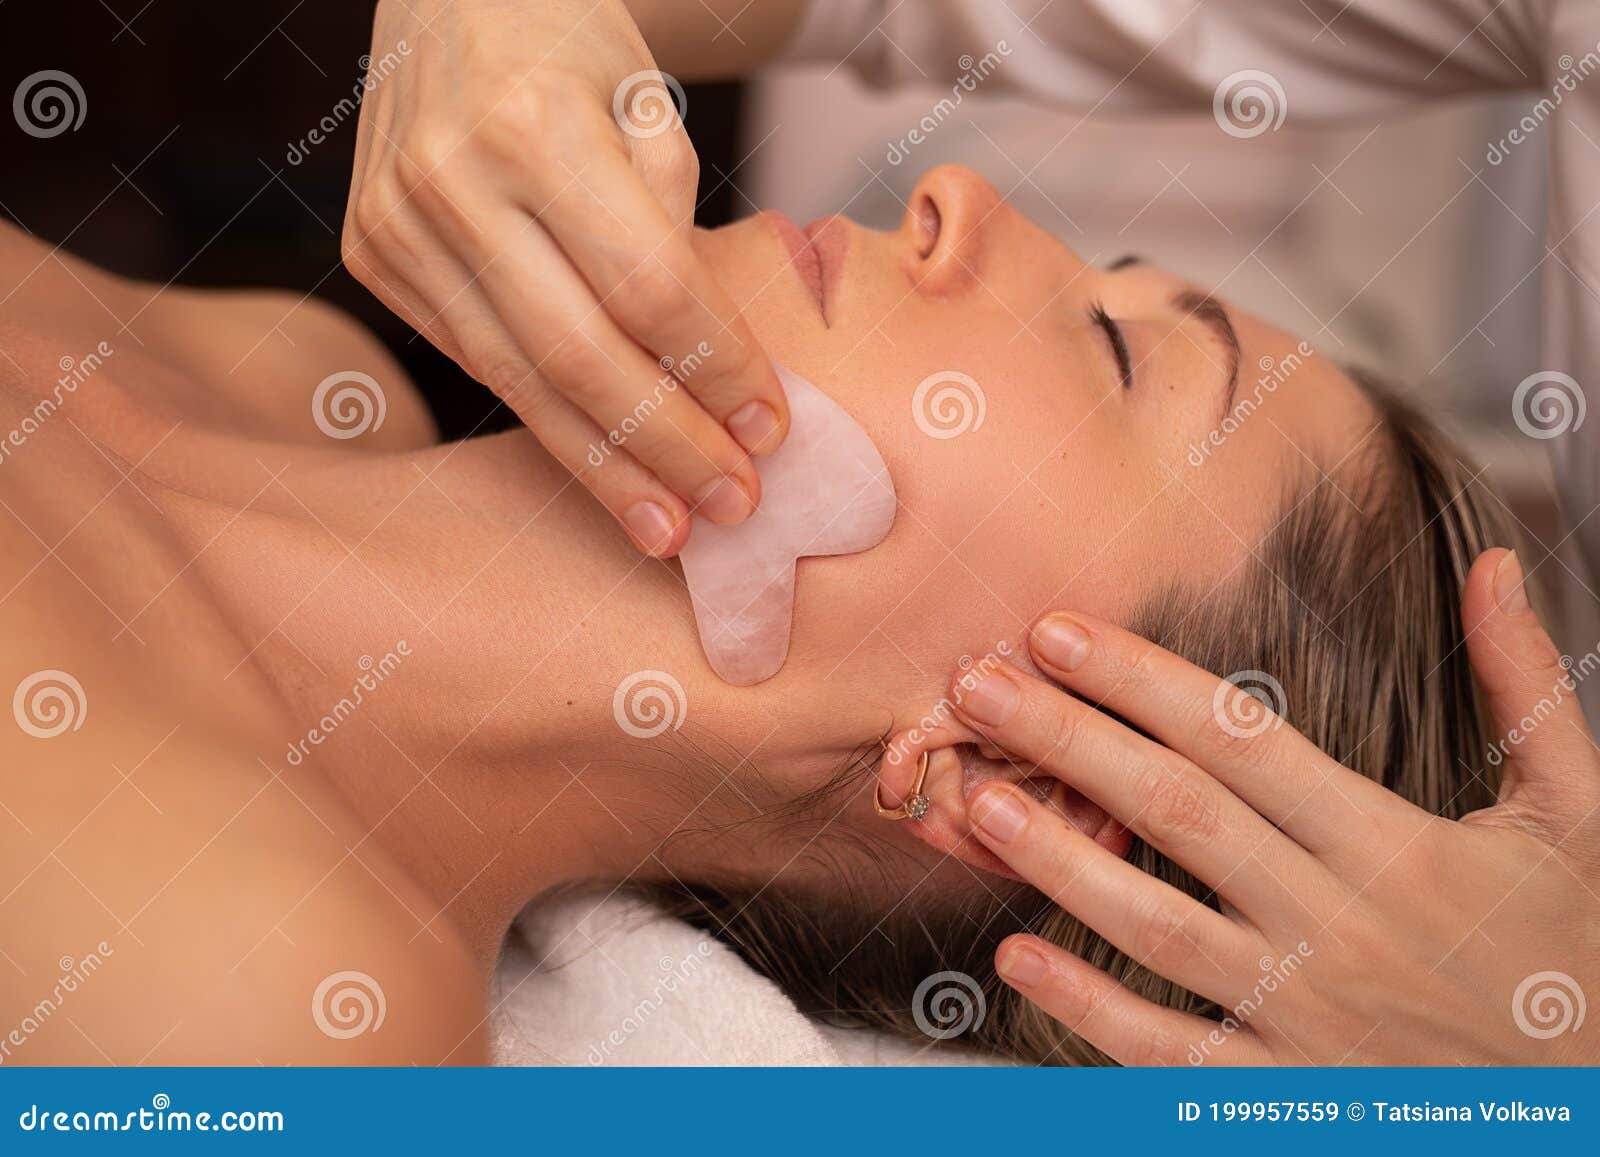 young and beautiful woman during chinese traditional massage - gua sha. close-up photo. beauty treatment in spa salon. anti-aging